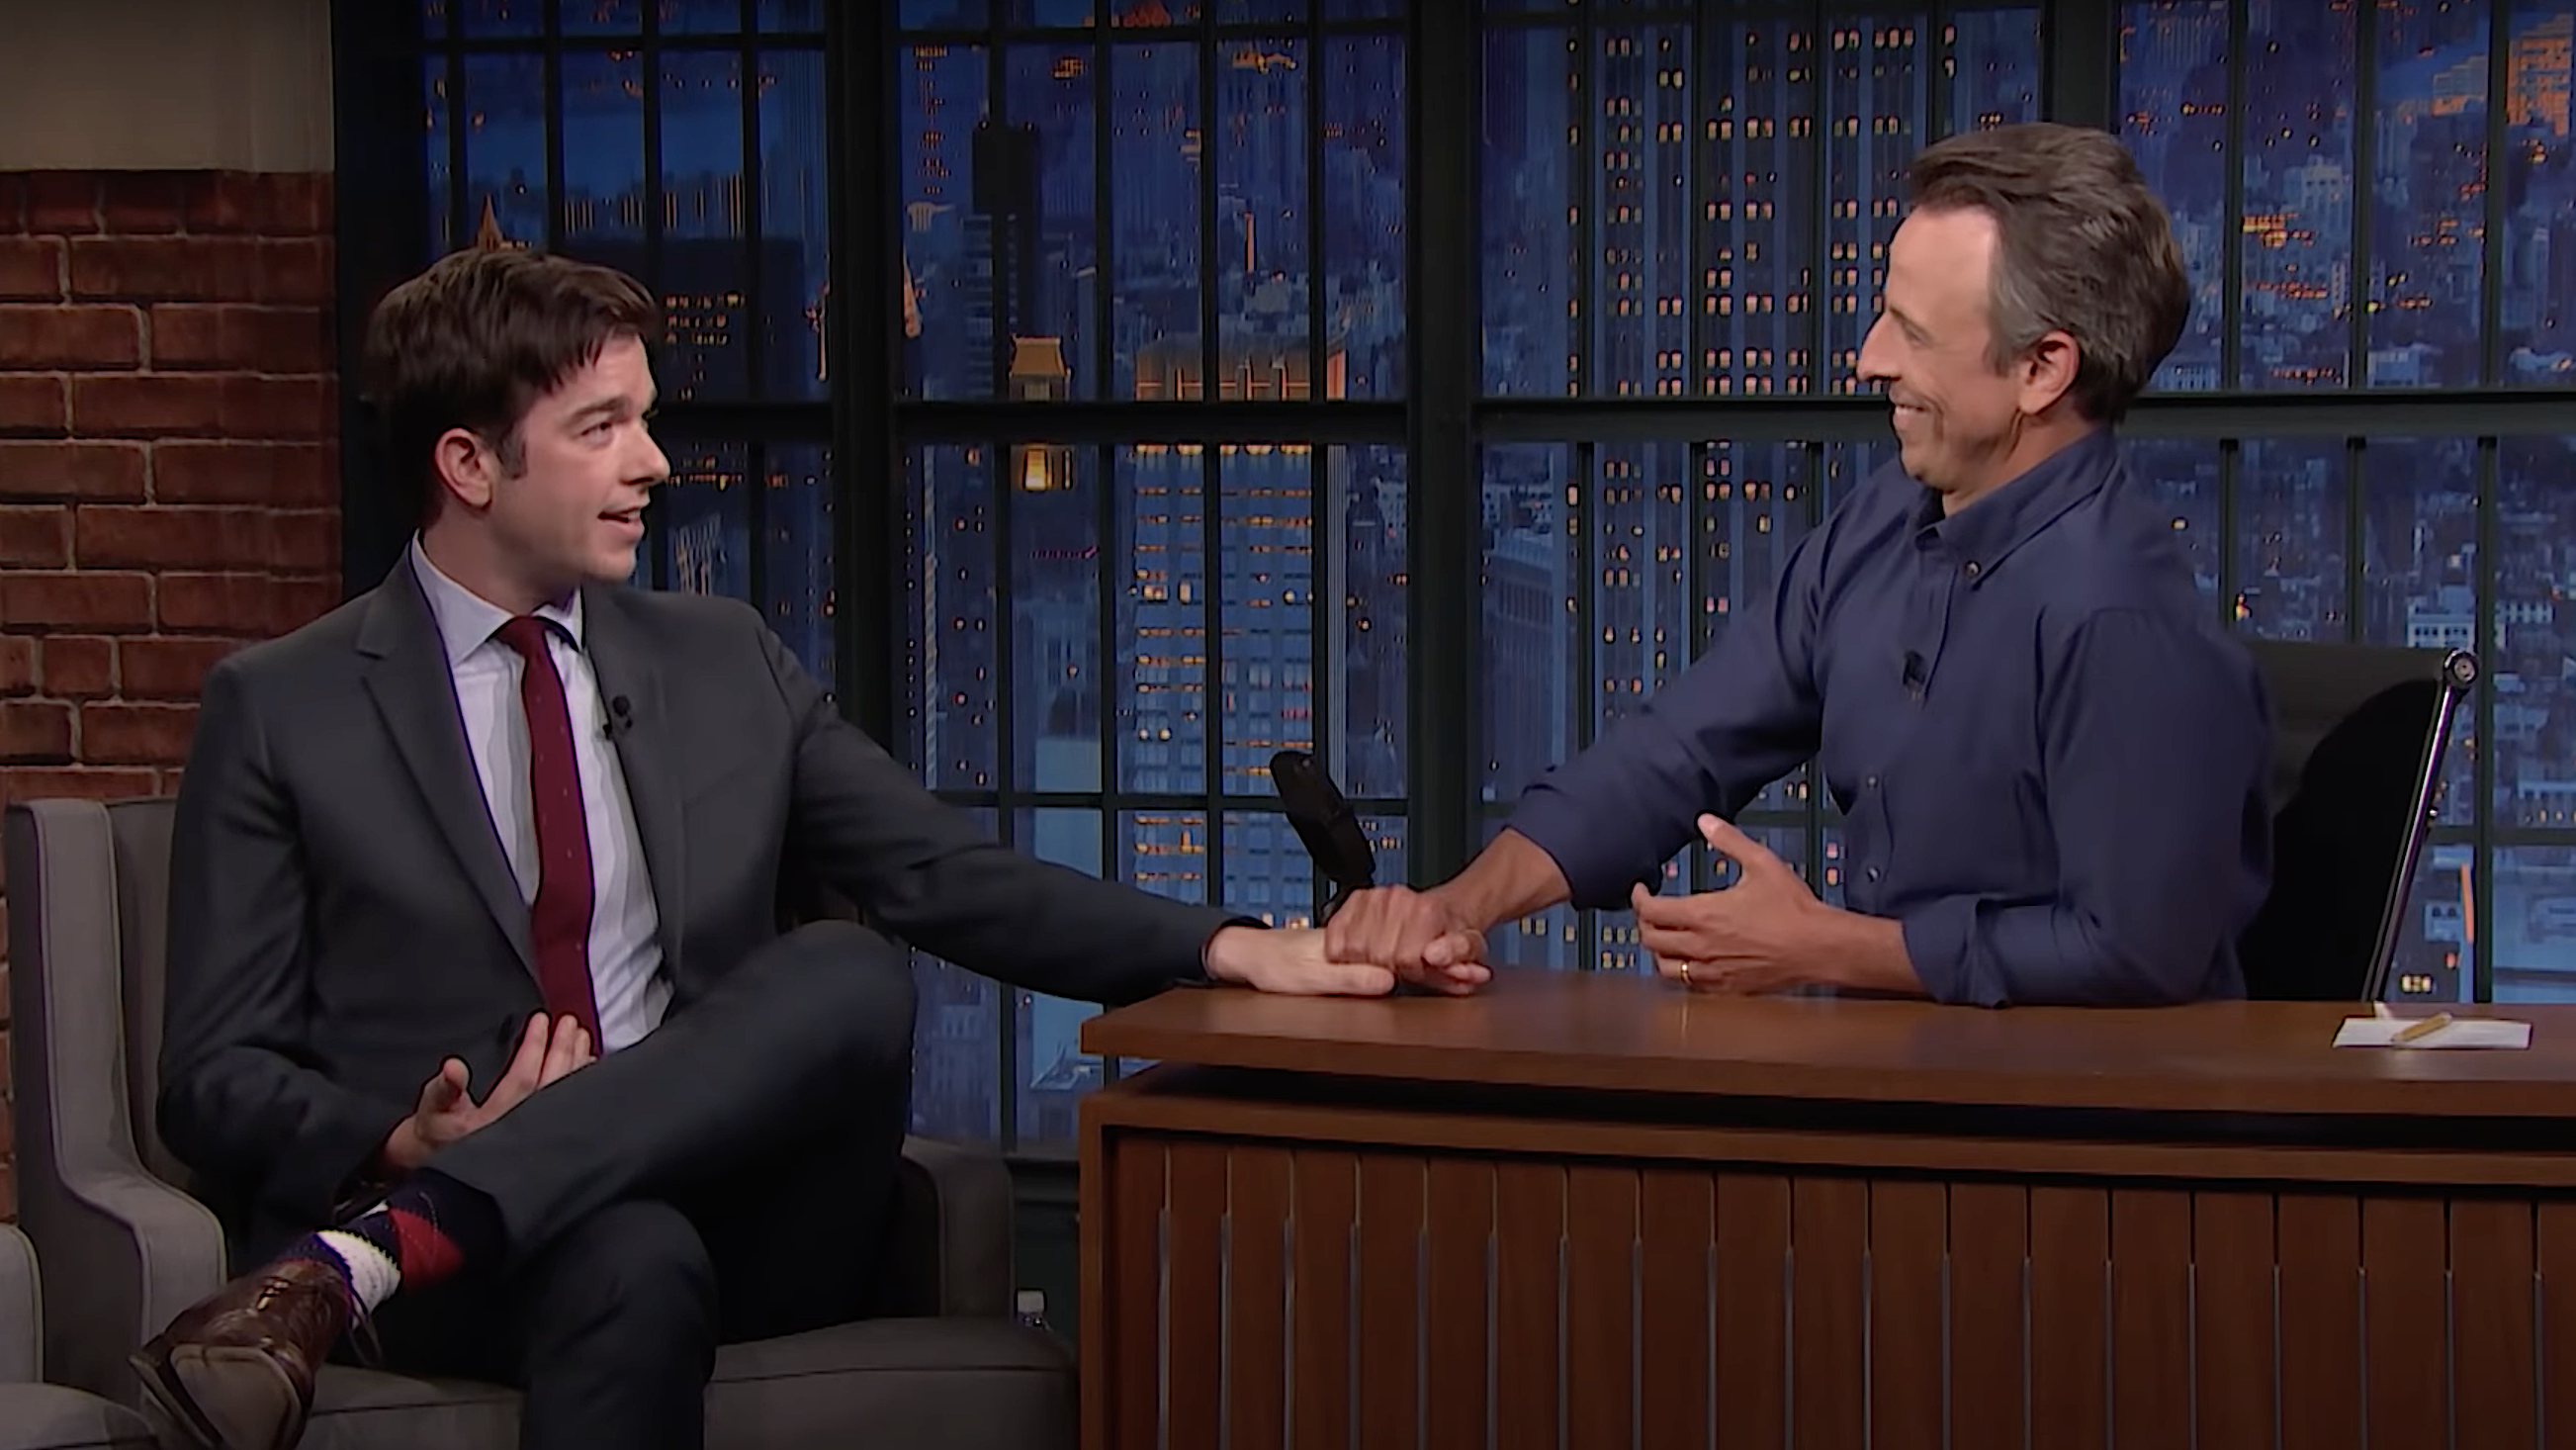 On Late Night, John Mulaney unpacks his truly eventful year, starting with Seth Meyers’ intervention